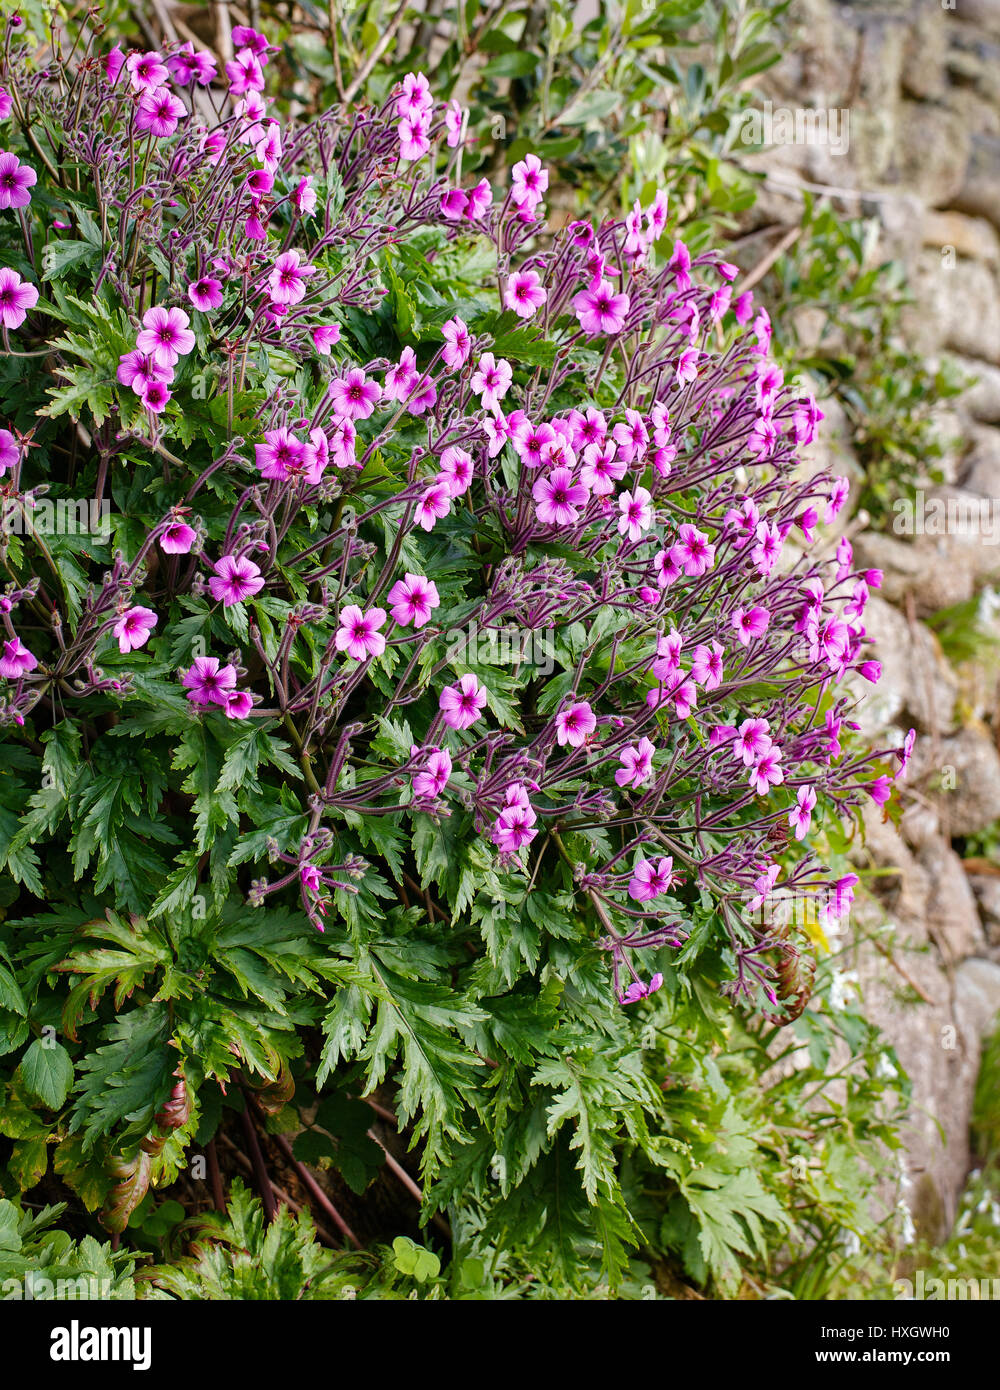 Geranium maderense the Madeira cranesbill growing by a wall on the island of Btyher in the Isles of Scilly UK Stock Photo